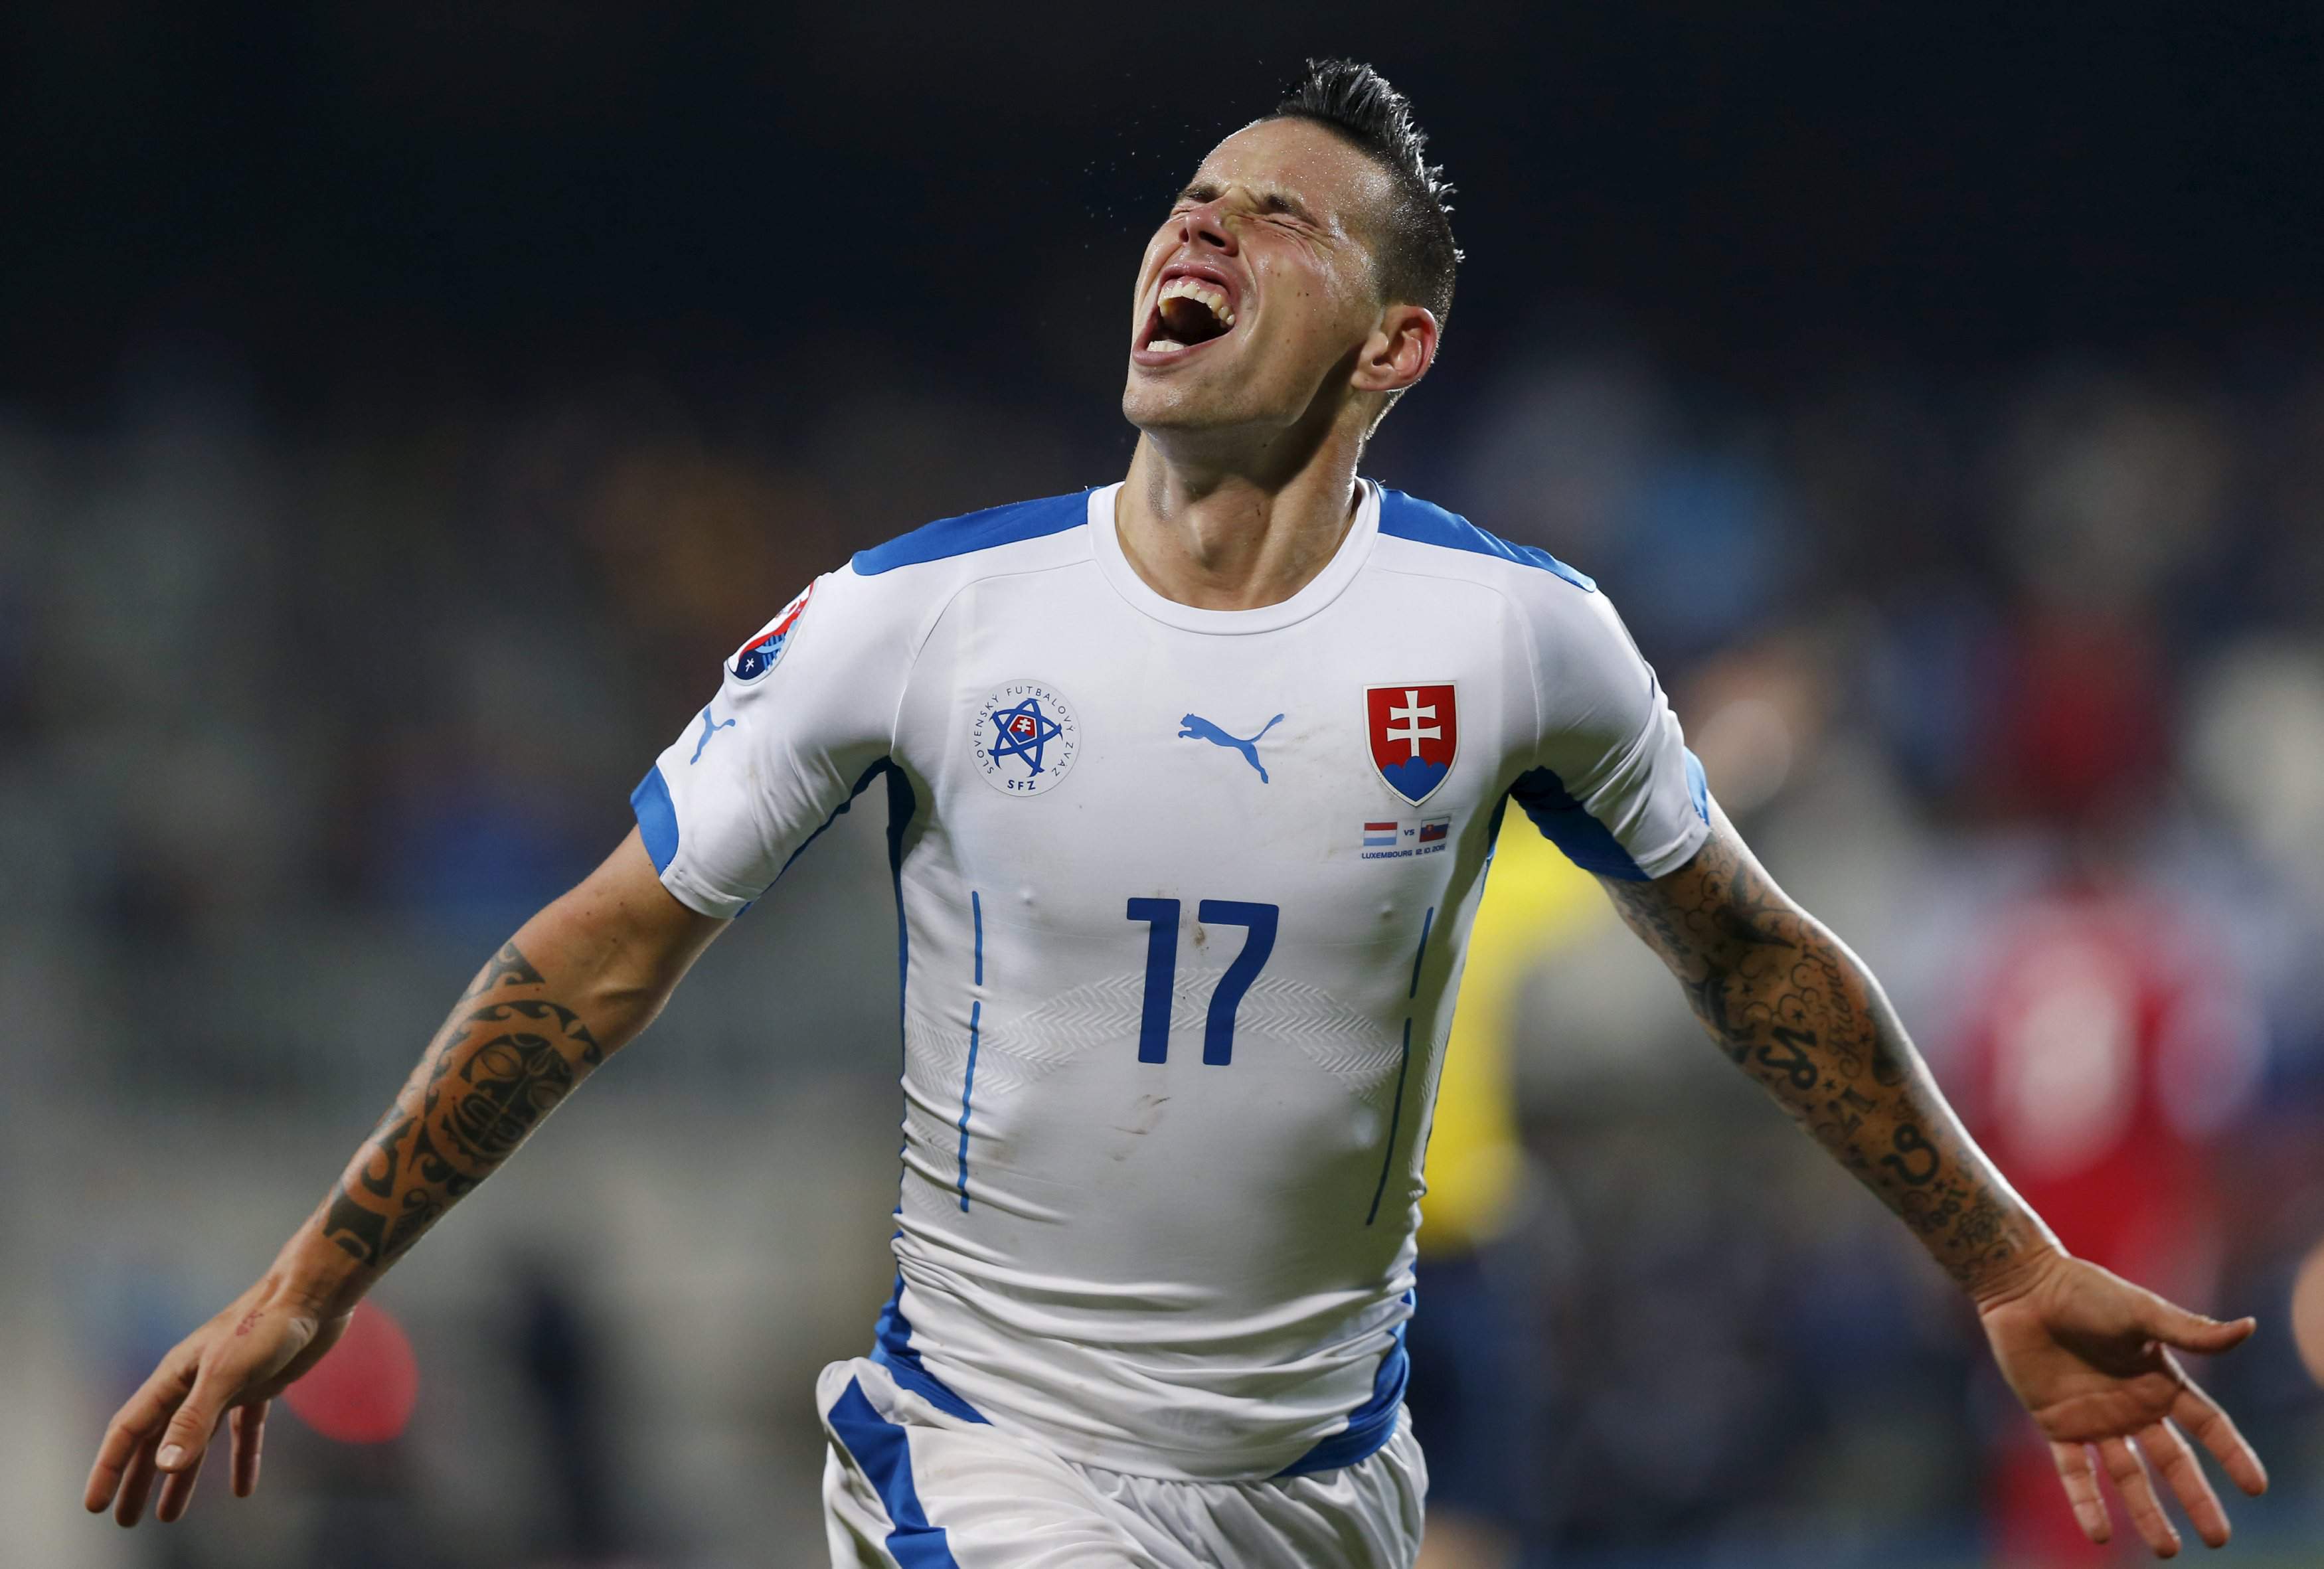 Slovakia's Marek Hamsik celebrates after scoring against Luxembourg during their Euro 2016 group C qualification match at the Josy Barthel stadium in Luxembourg, October 12, 2015. REUTERS/Francois Lenoir